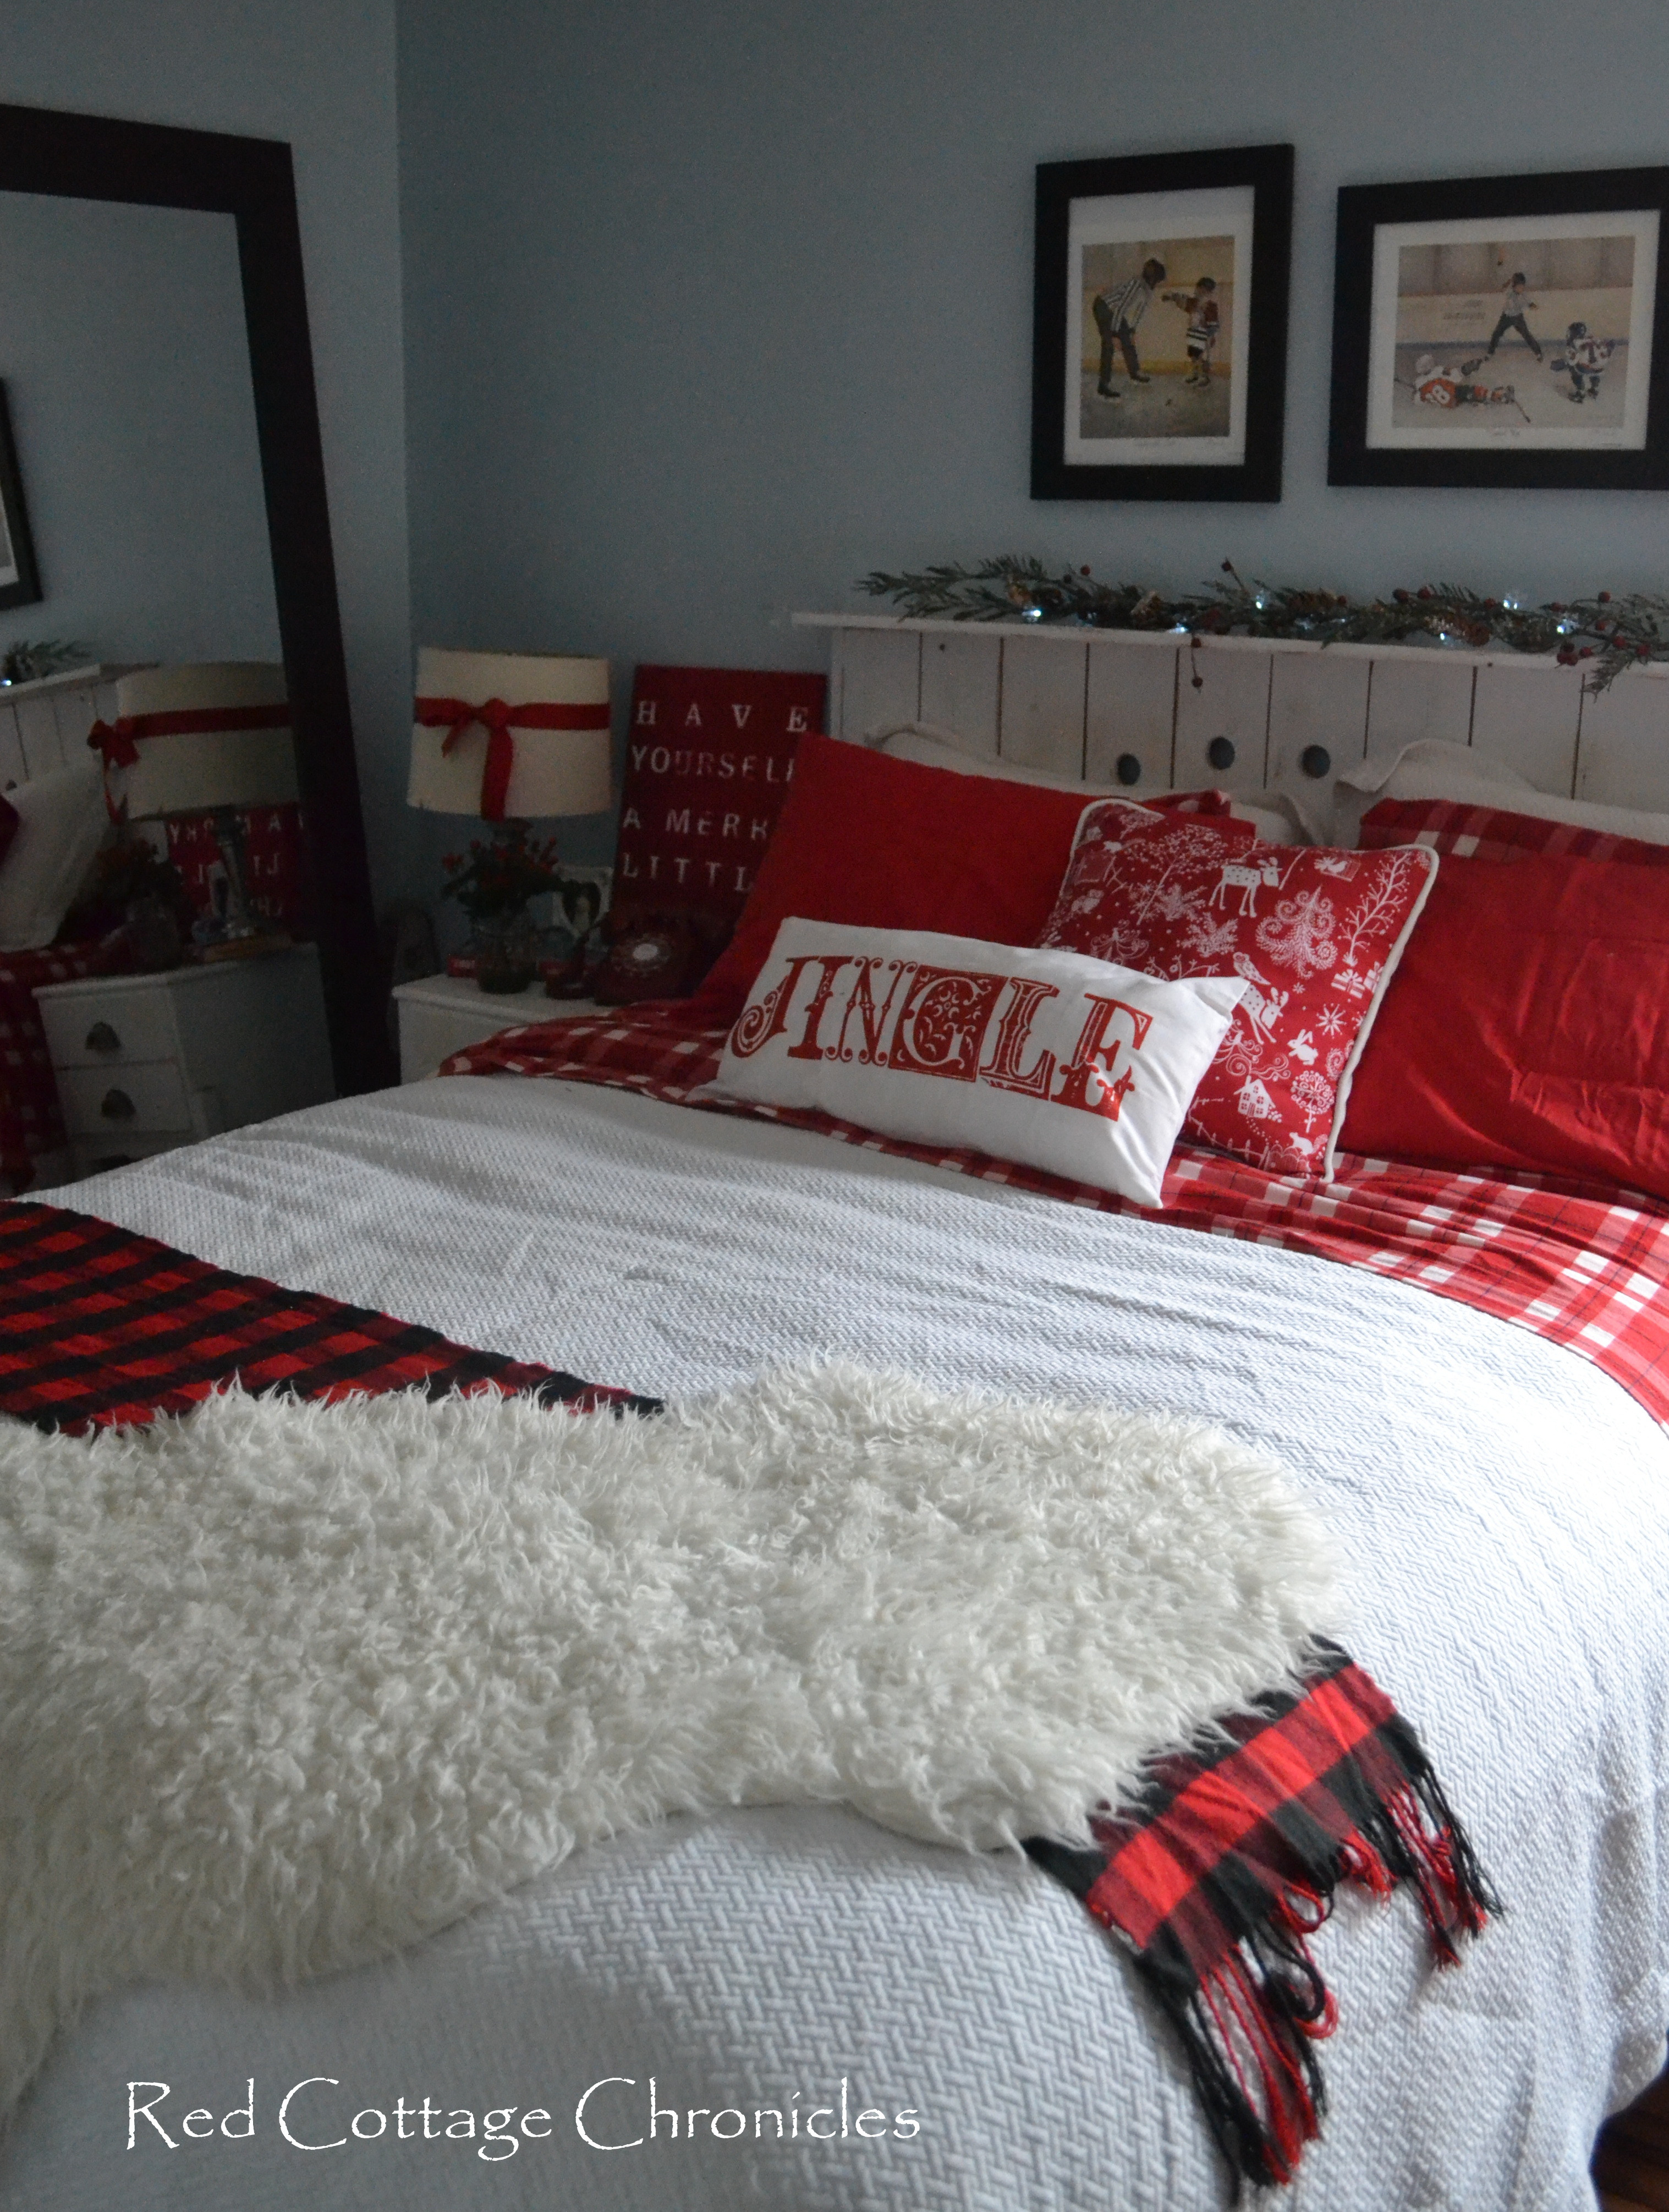 Christmas Decorated Bedroom
 Our Christmas Bedroom Red Cottage Chronicles